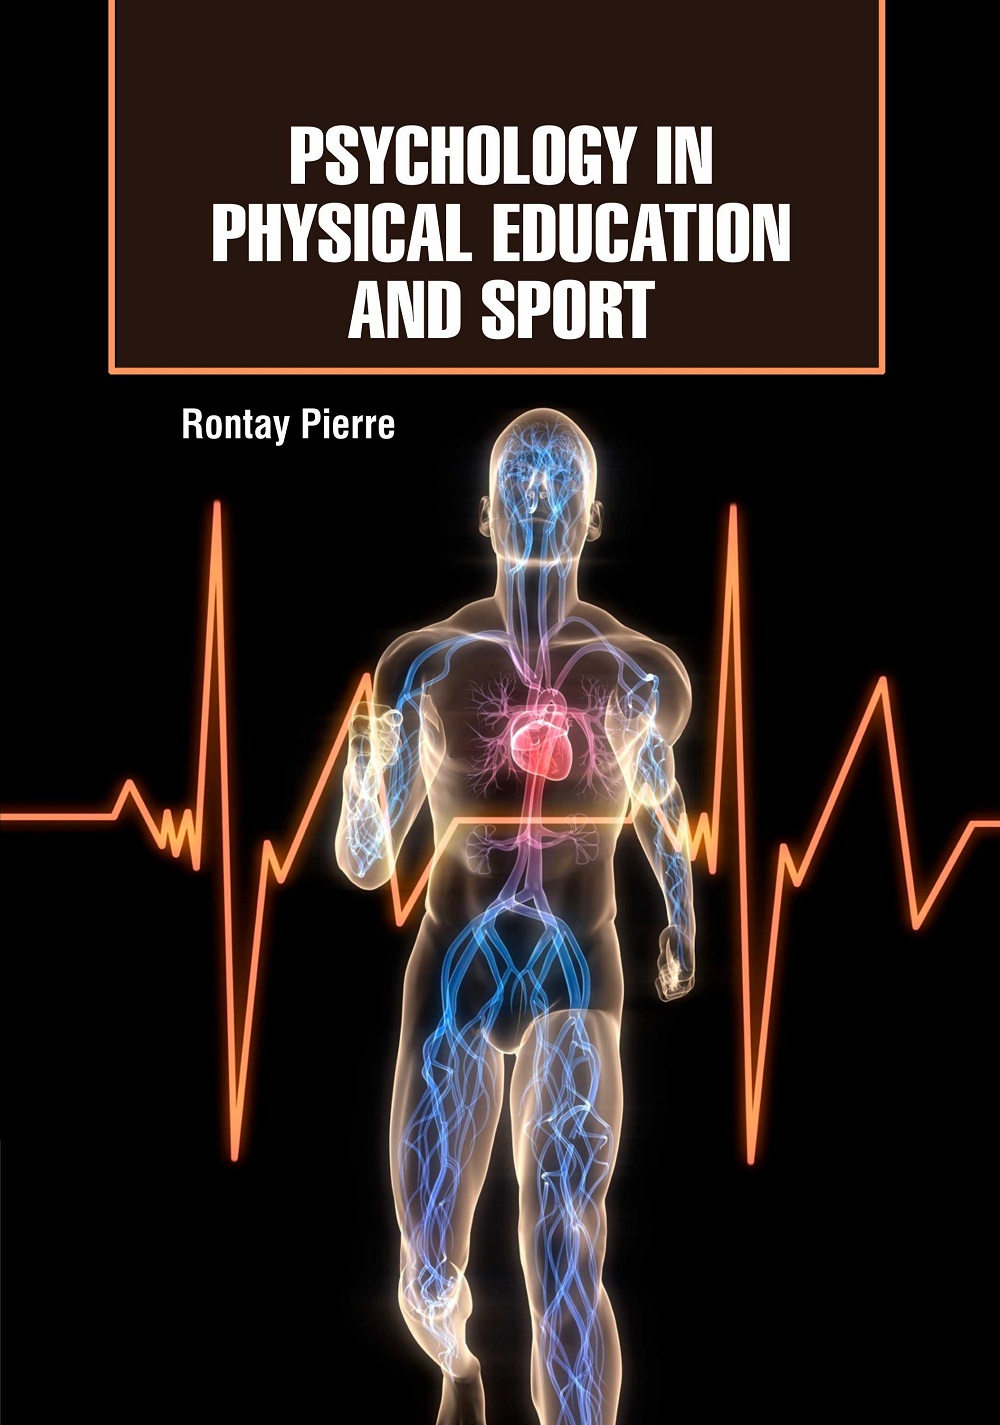 Psychology in Physical Education and Sport